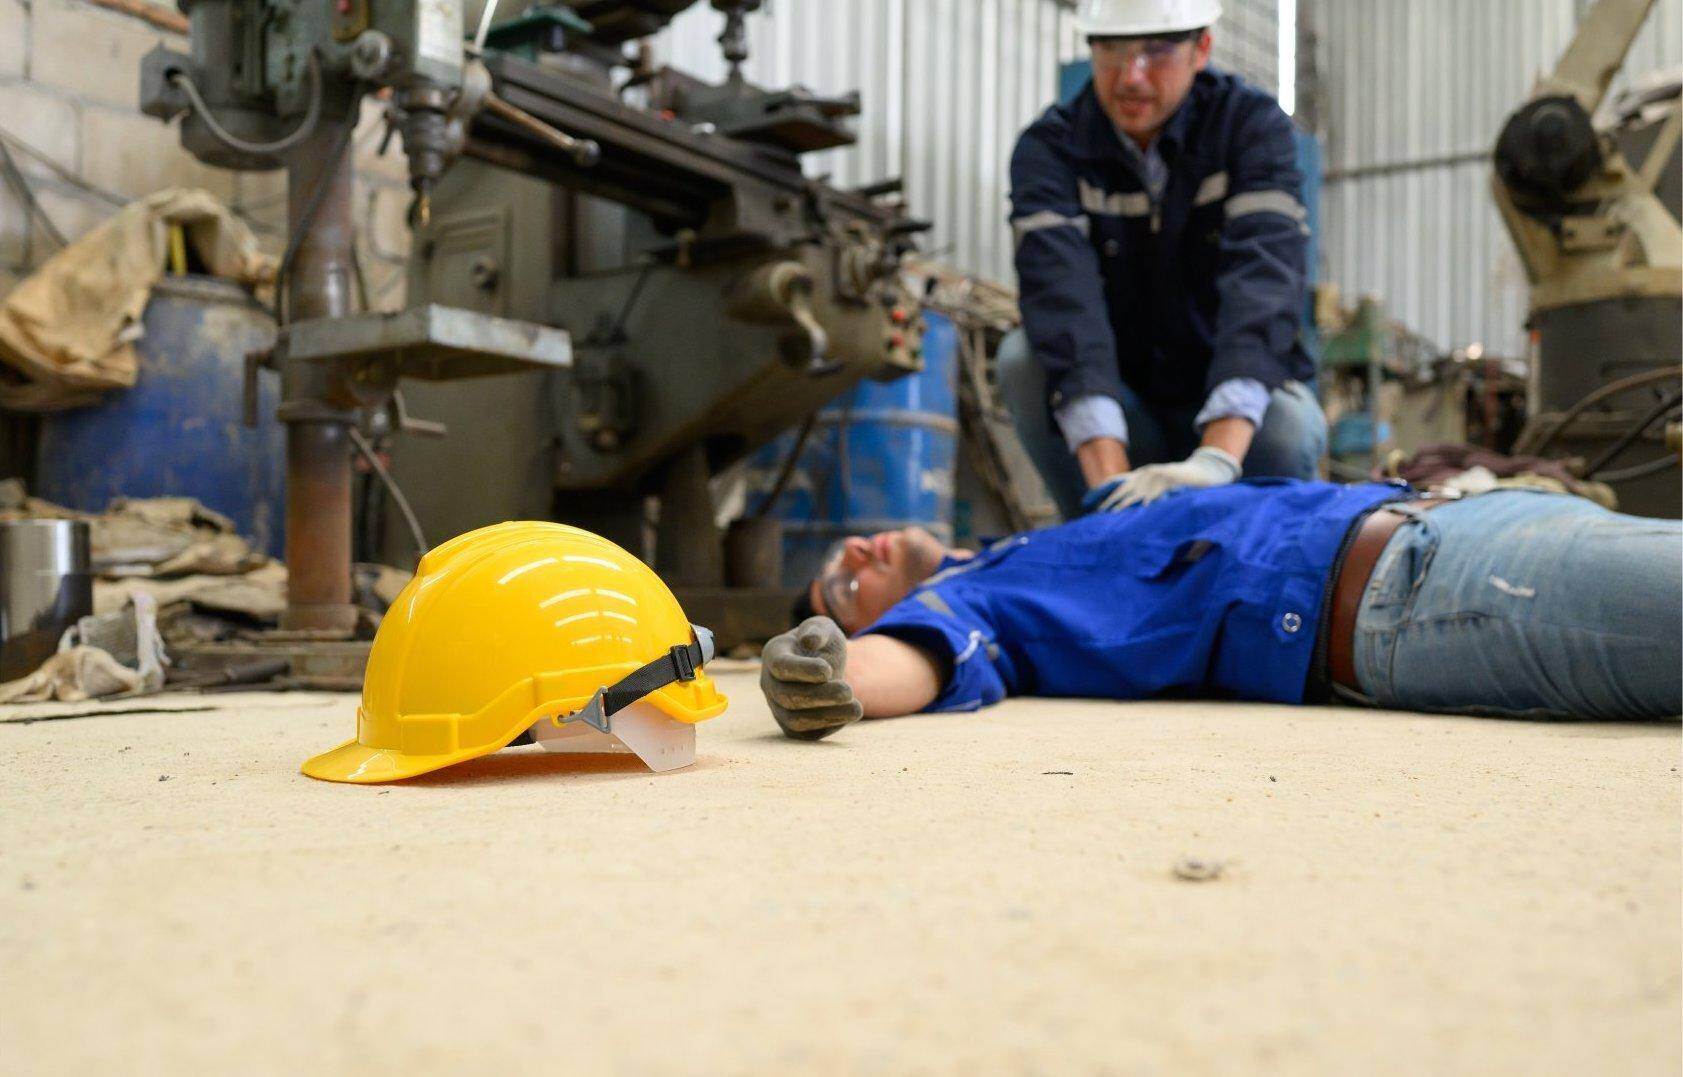 An unconscious man who has been injured on the job who will file for workers compensation in Waycross, Georgia